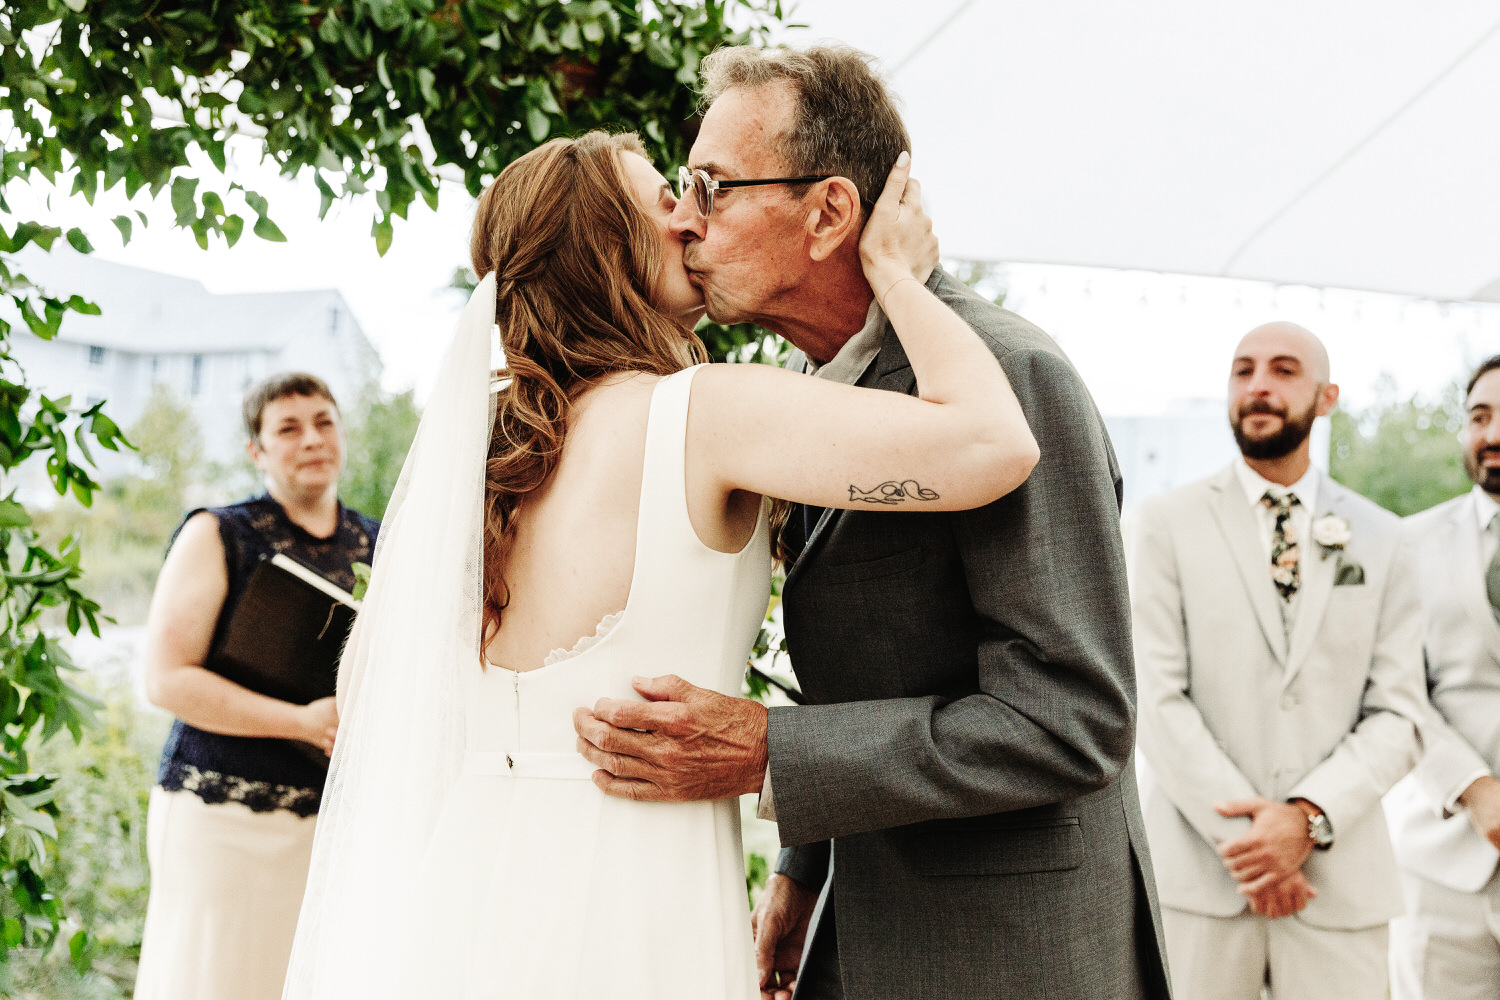 Bride kissing her father on the cheek during wedding ceremony